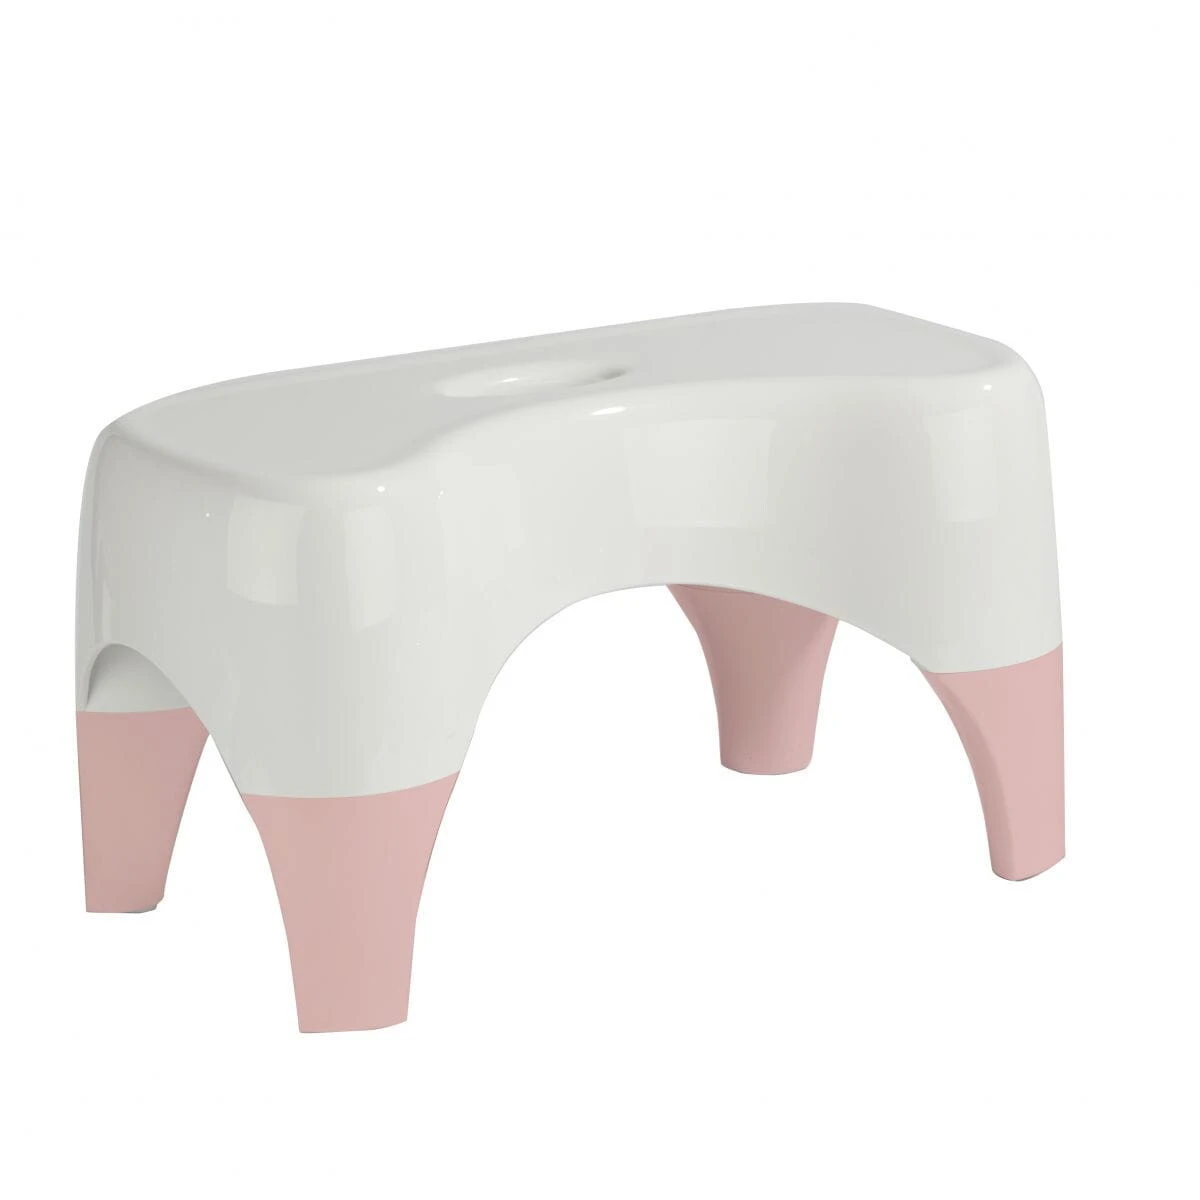 Thickened, Reinforced Bath Stool for Adults, Kids